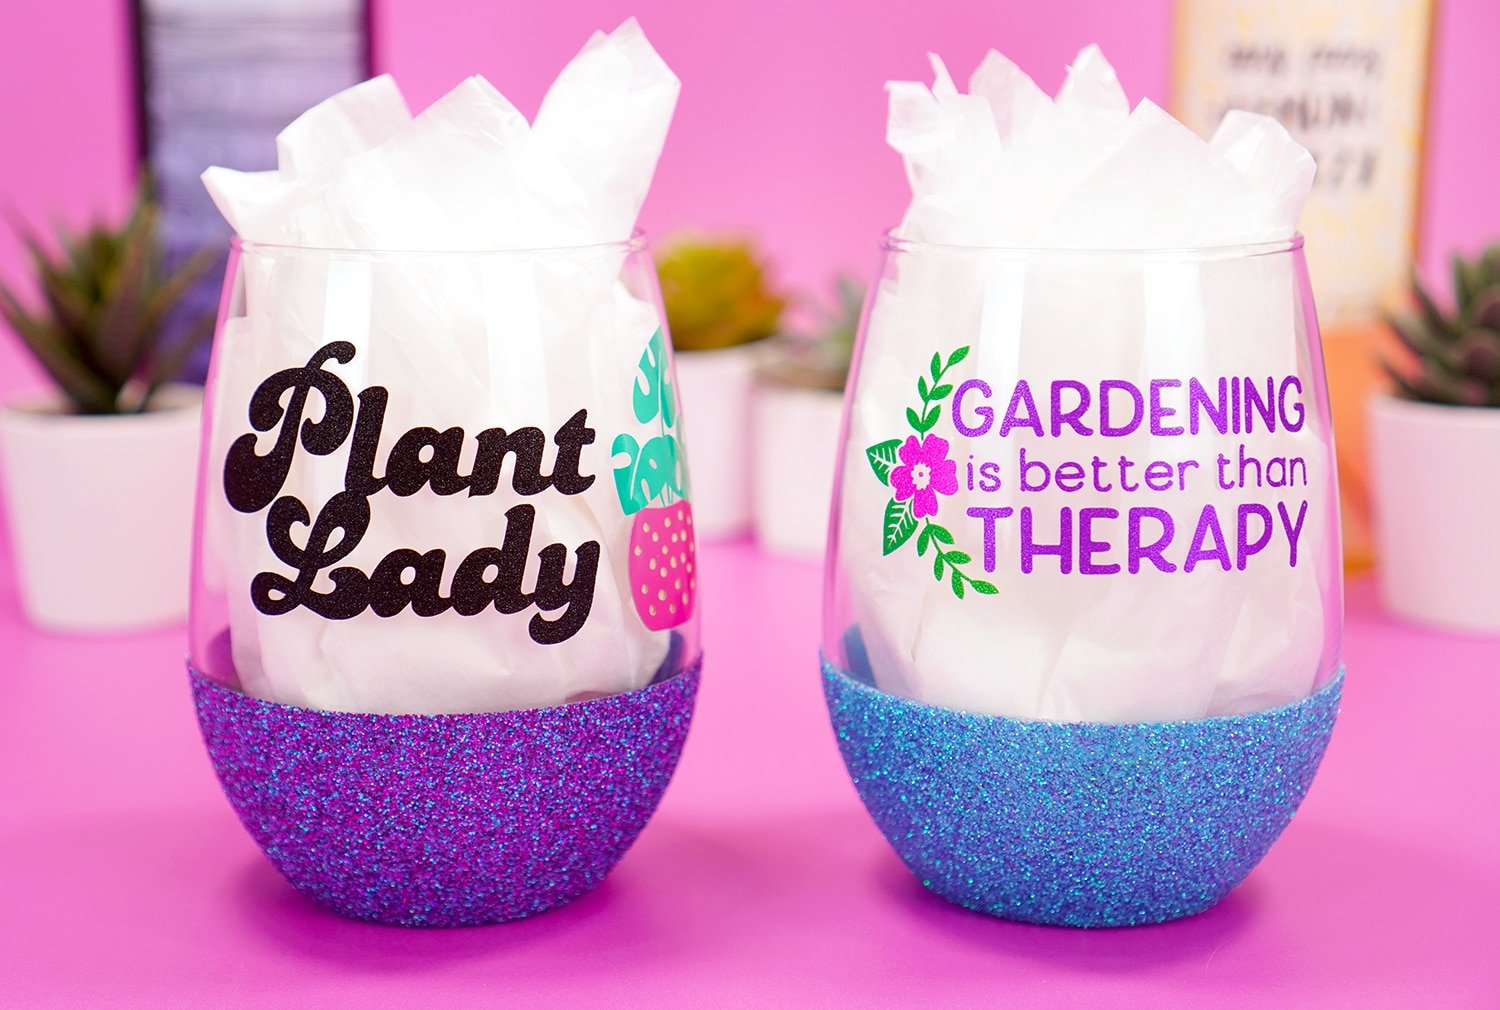 Plant Lady purple glitter wine glass and "Gardening is Better Than Therapy" blue glittered wine glass on purple background with plants